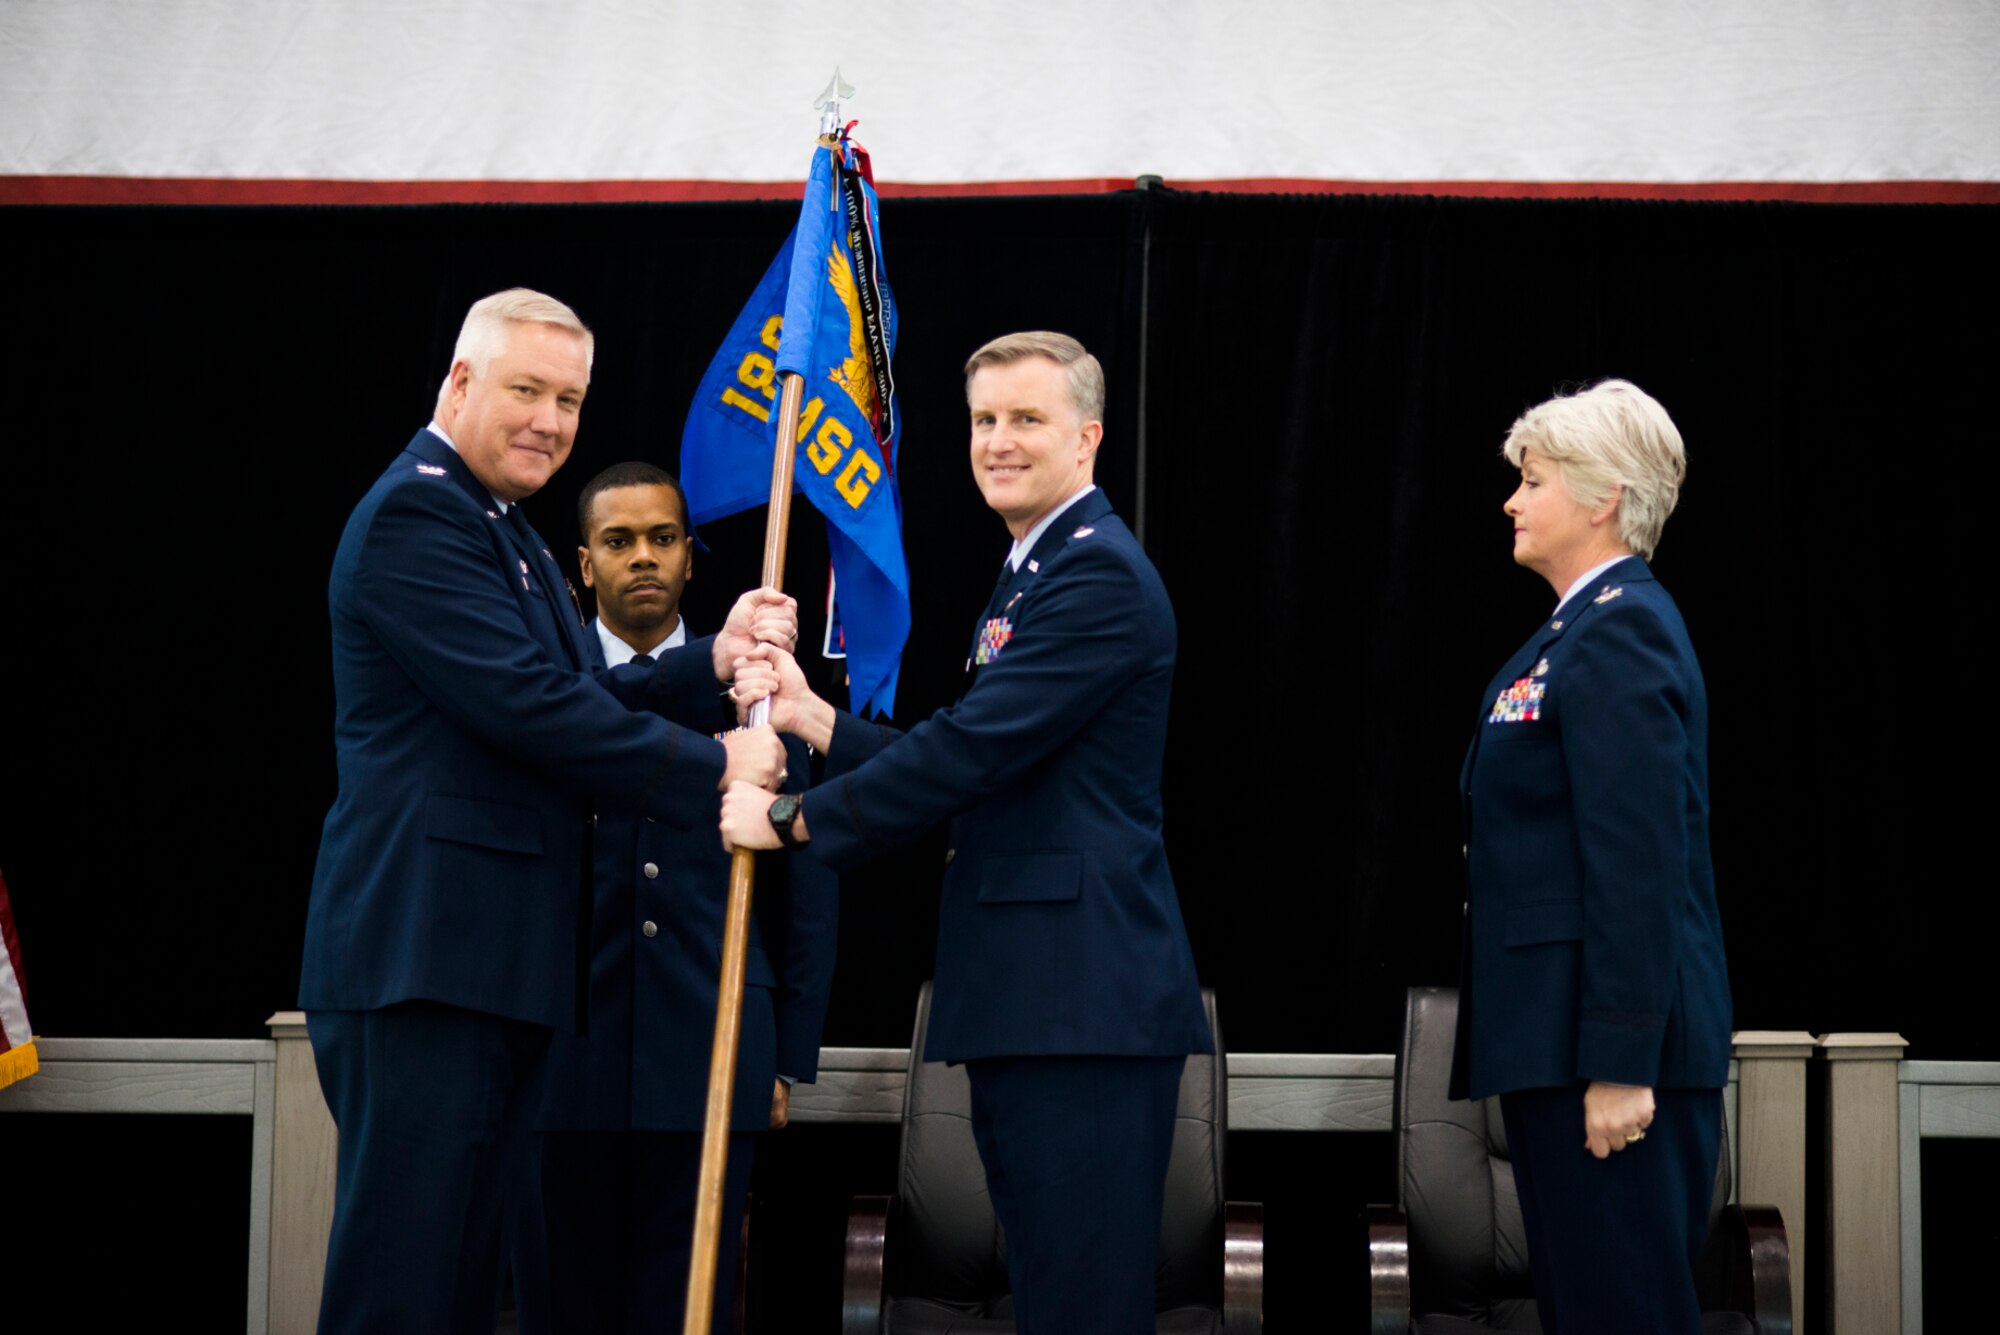 Col. Rob Ator, 189th Airlift Wing commander, passes the guideon to Lt. Col. Don Clark as he takes command of the 189th Mission Support Group at hangar 207 on Sunday Mar. 8, 2015. Also pictured (from L to R) is Senior Master Sgt. Jamar Bennett, 189th Mission Support Group first sergeant and former Mission Support Group commander, Col. Tamhra Huthens-Frye.
